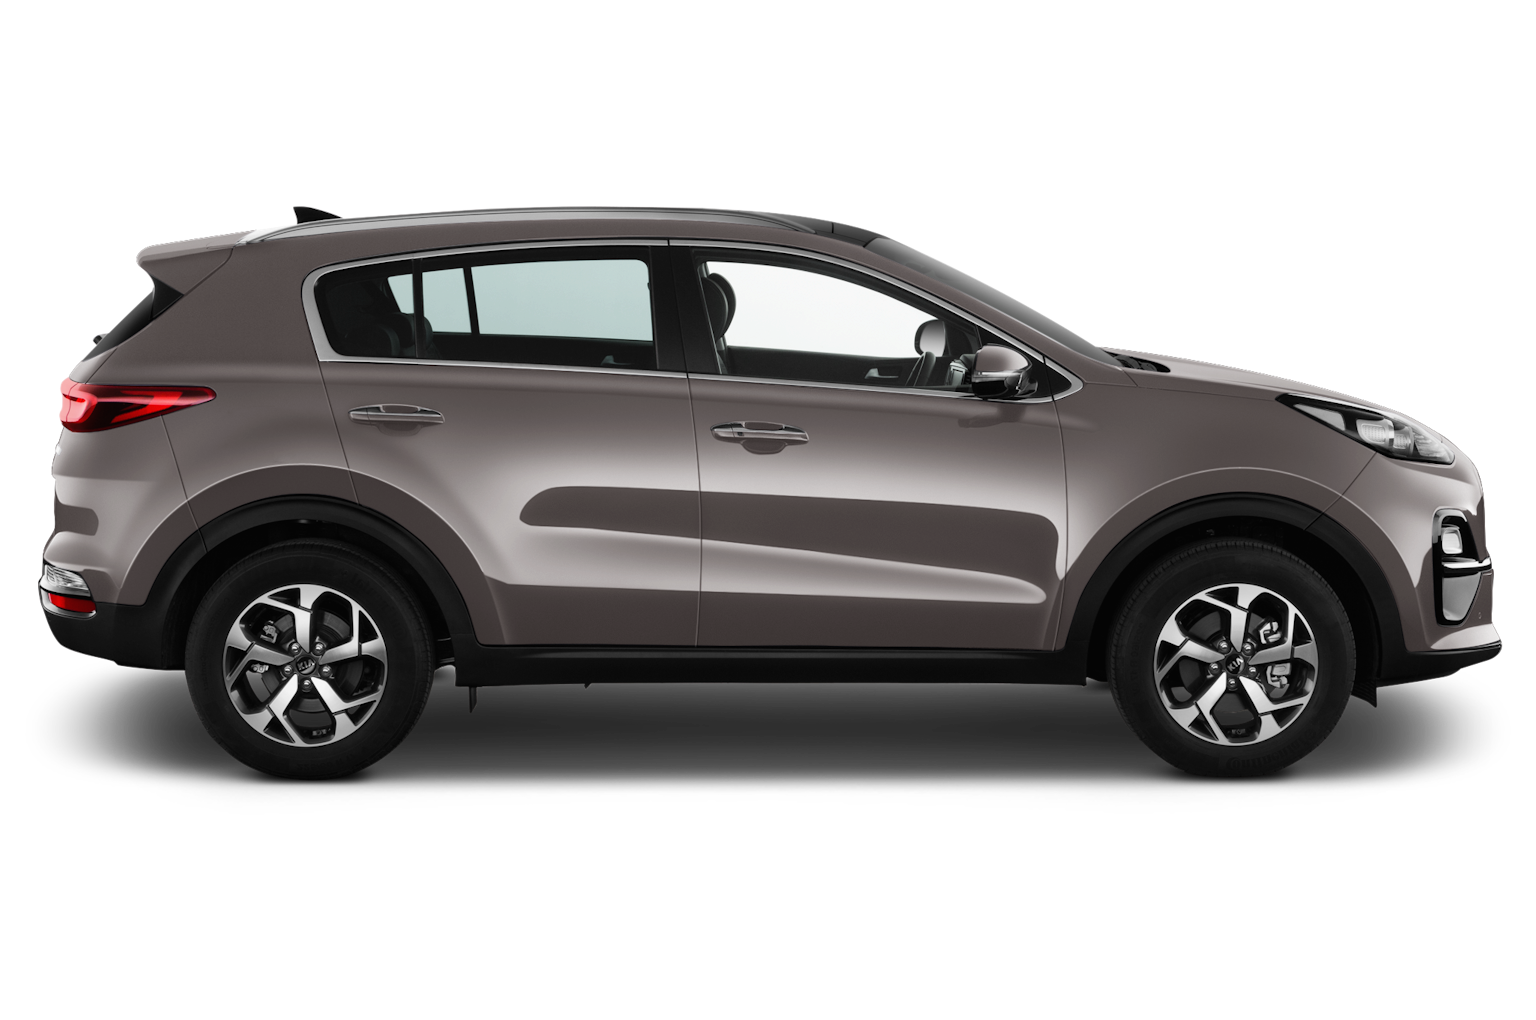 Kia Sportage Lease deals from £205pm carwow